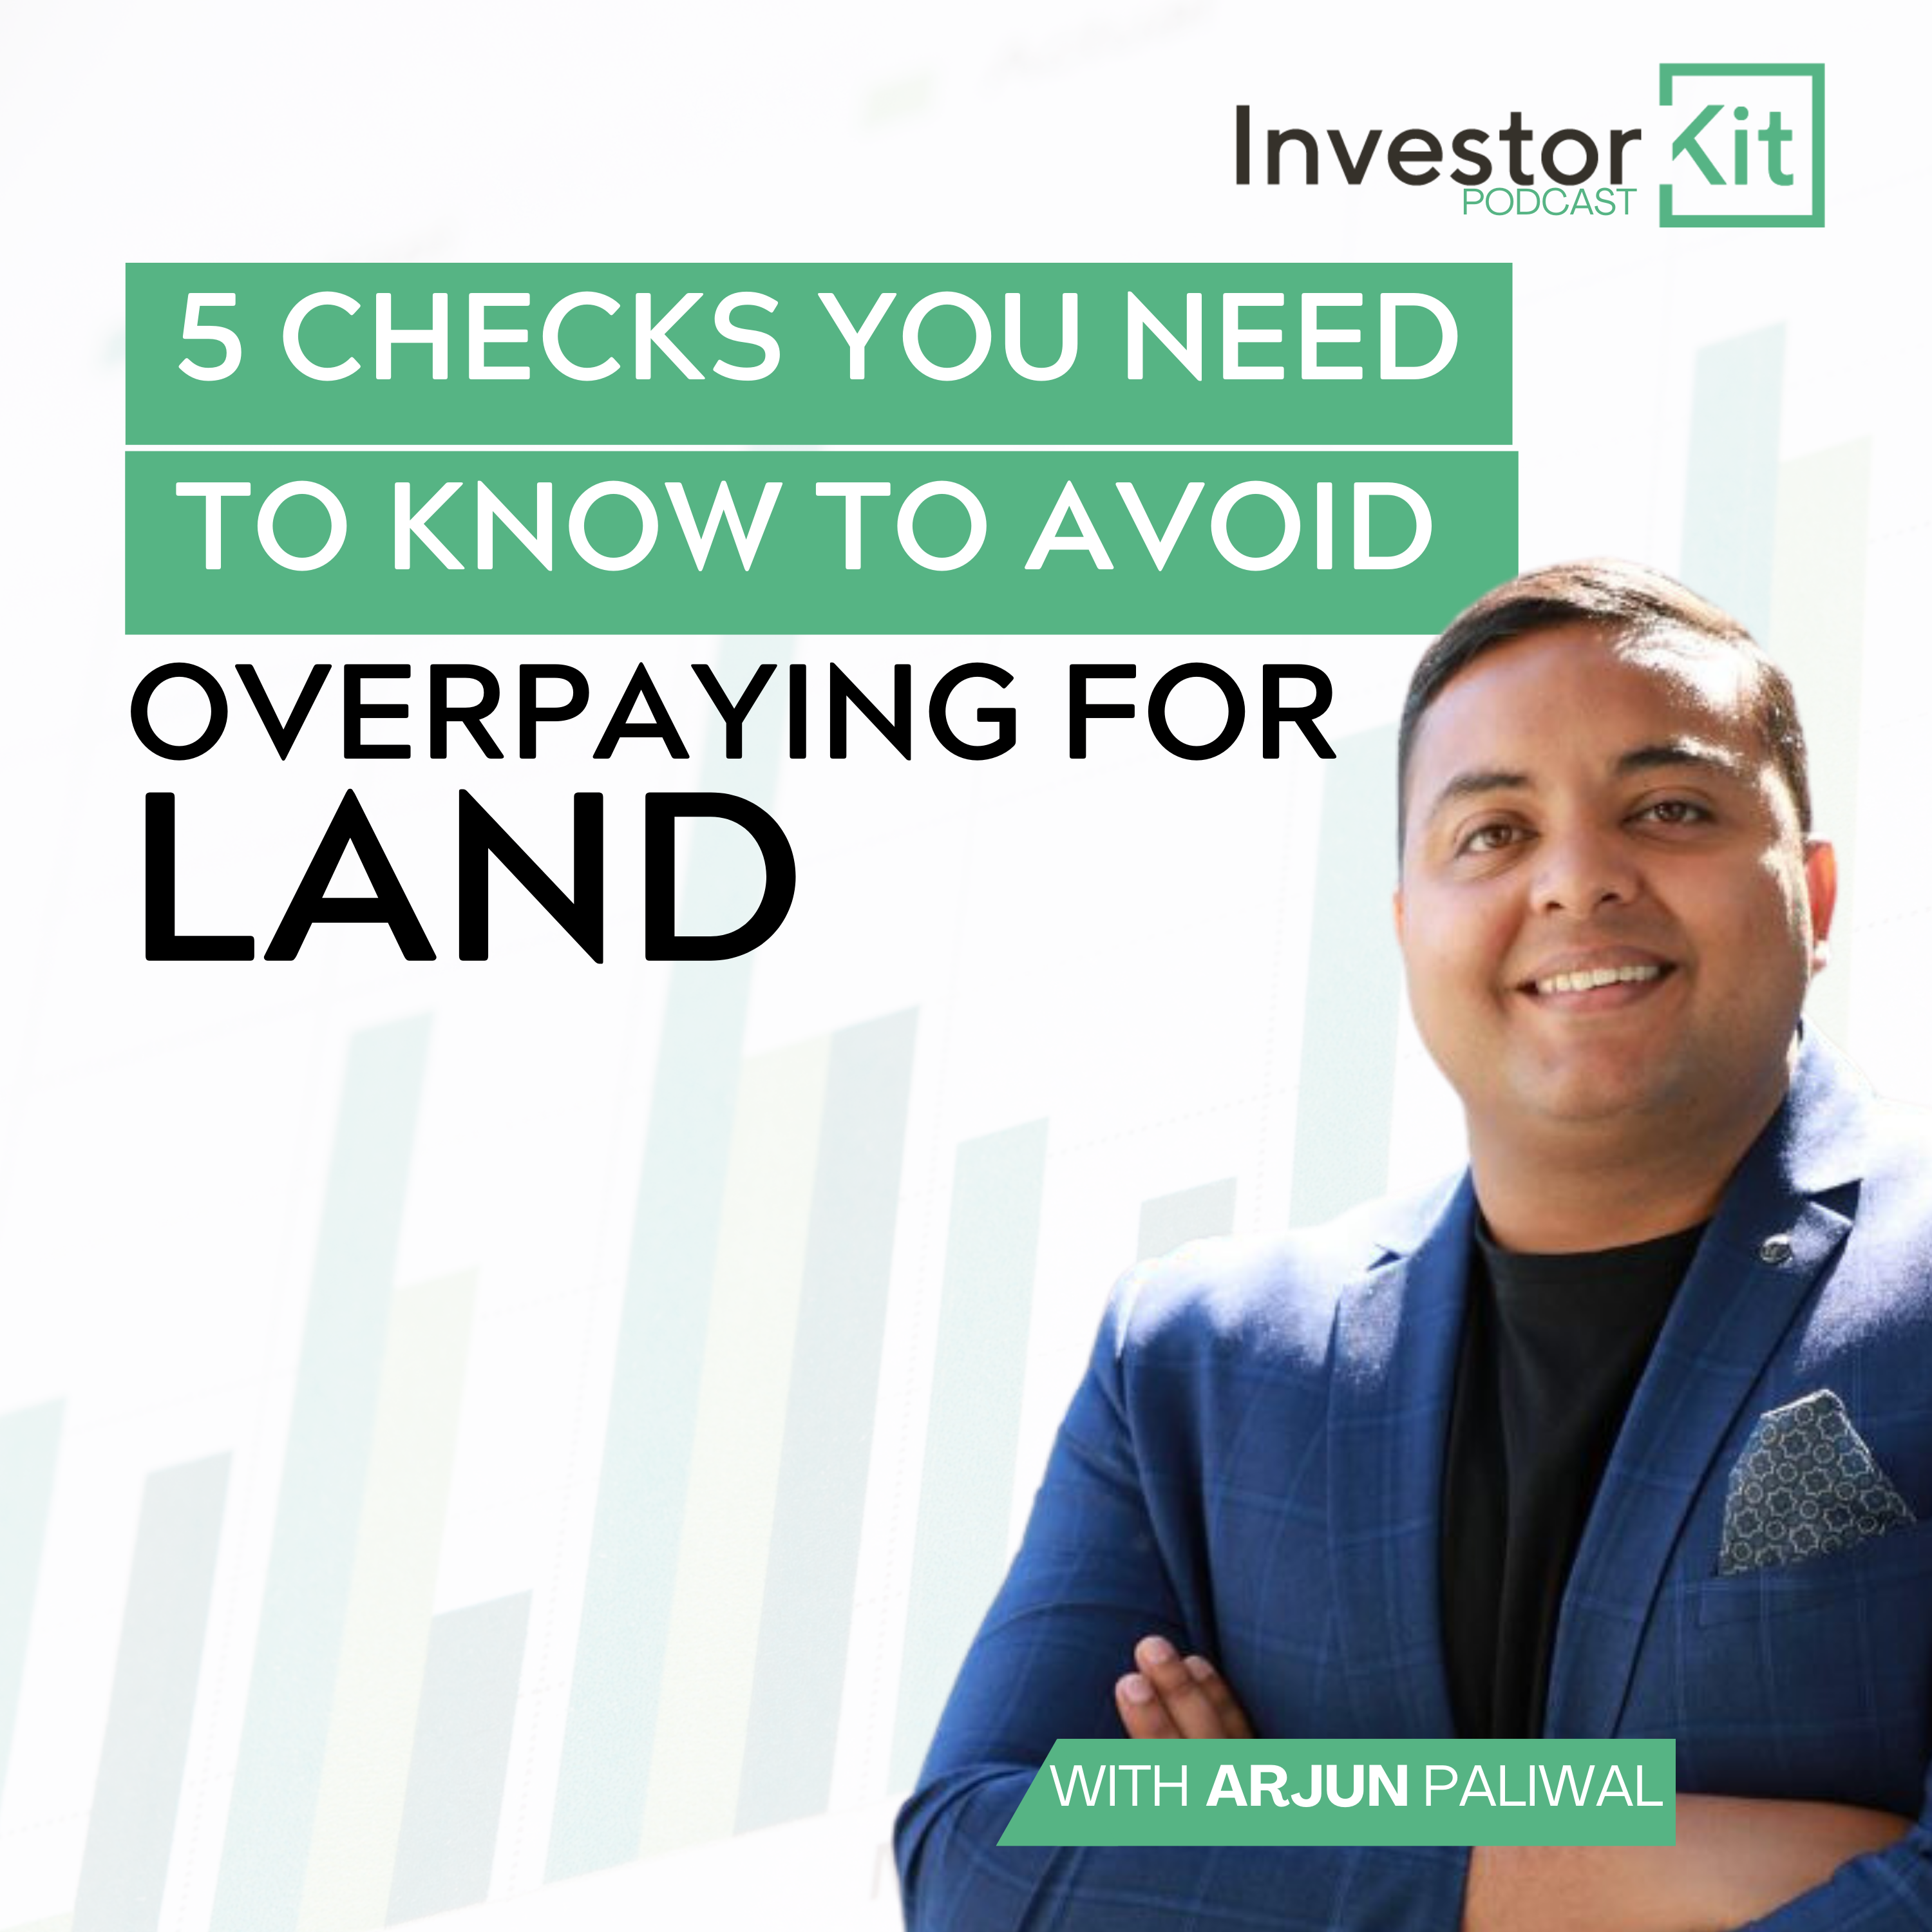 The 5 Checks You Need to Know to Avoid Overpaying for Land